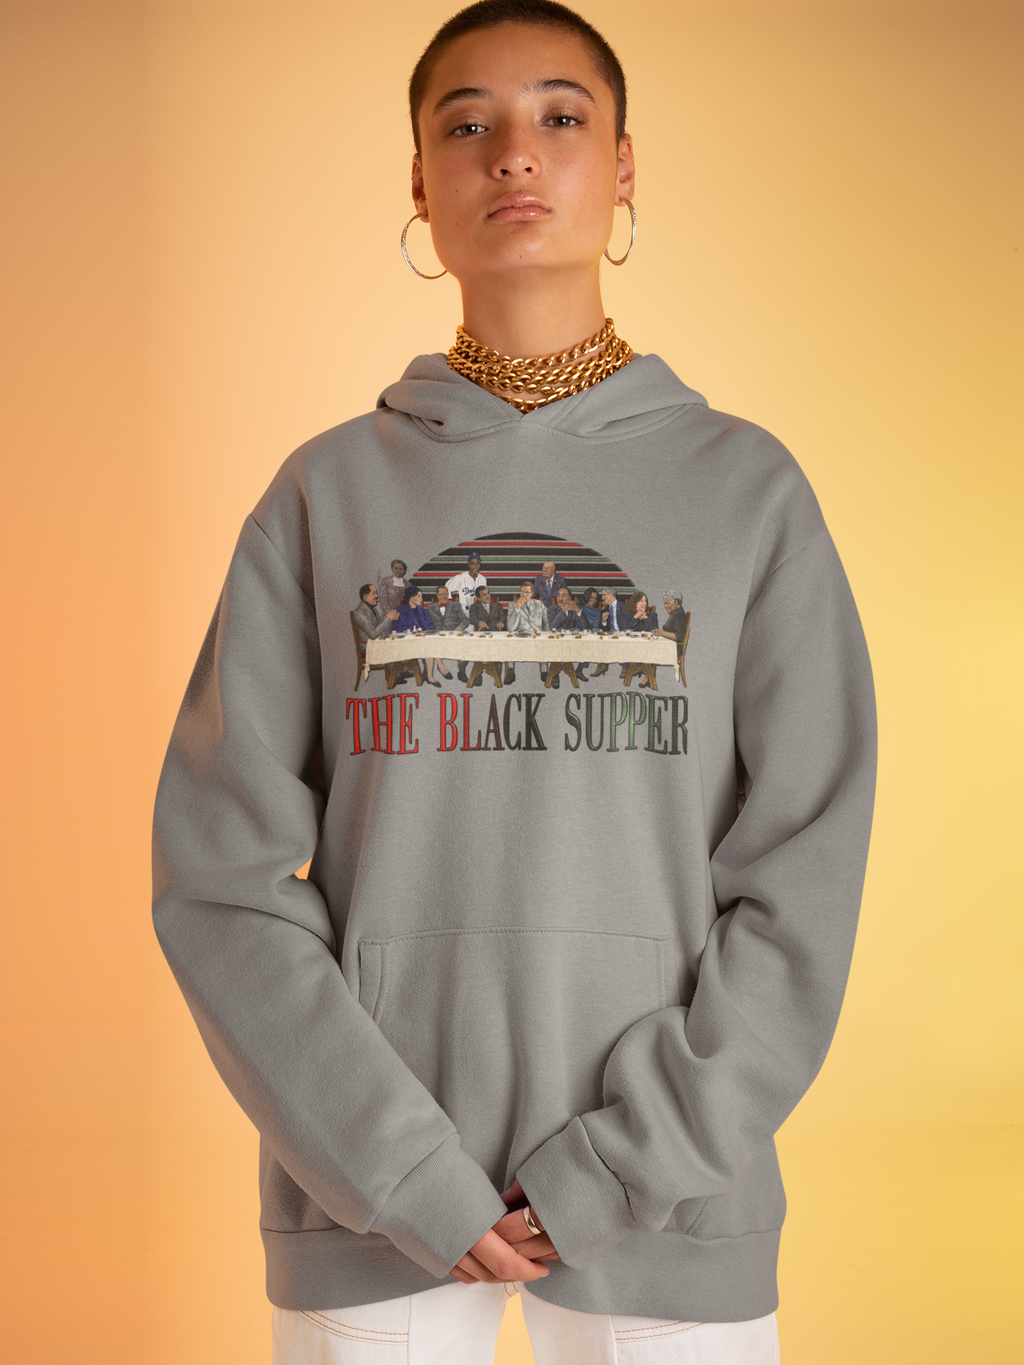 mockup-of-a-tough-woman-wearing-a-hoodie-and-a-golden-chain-m653